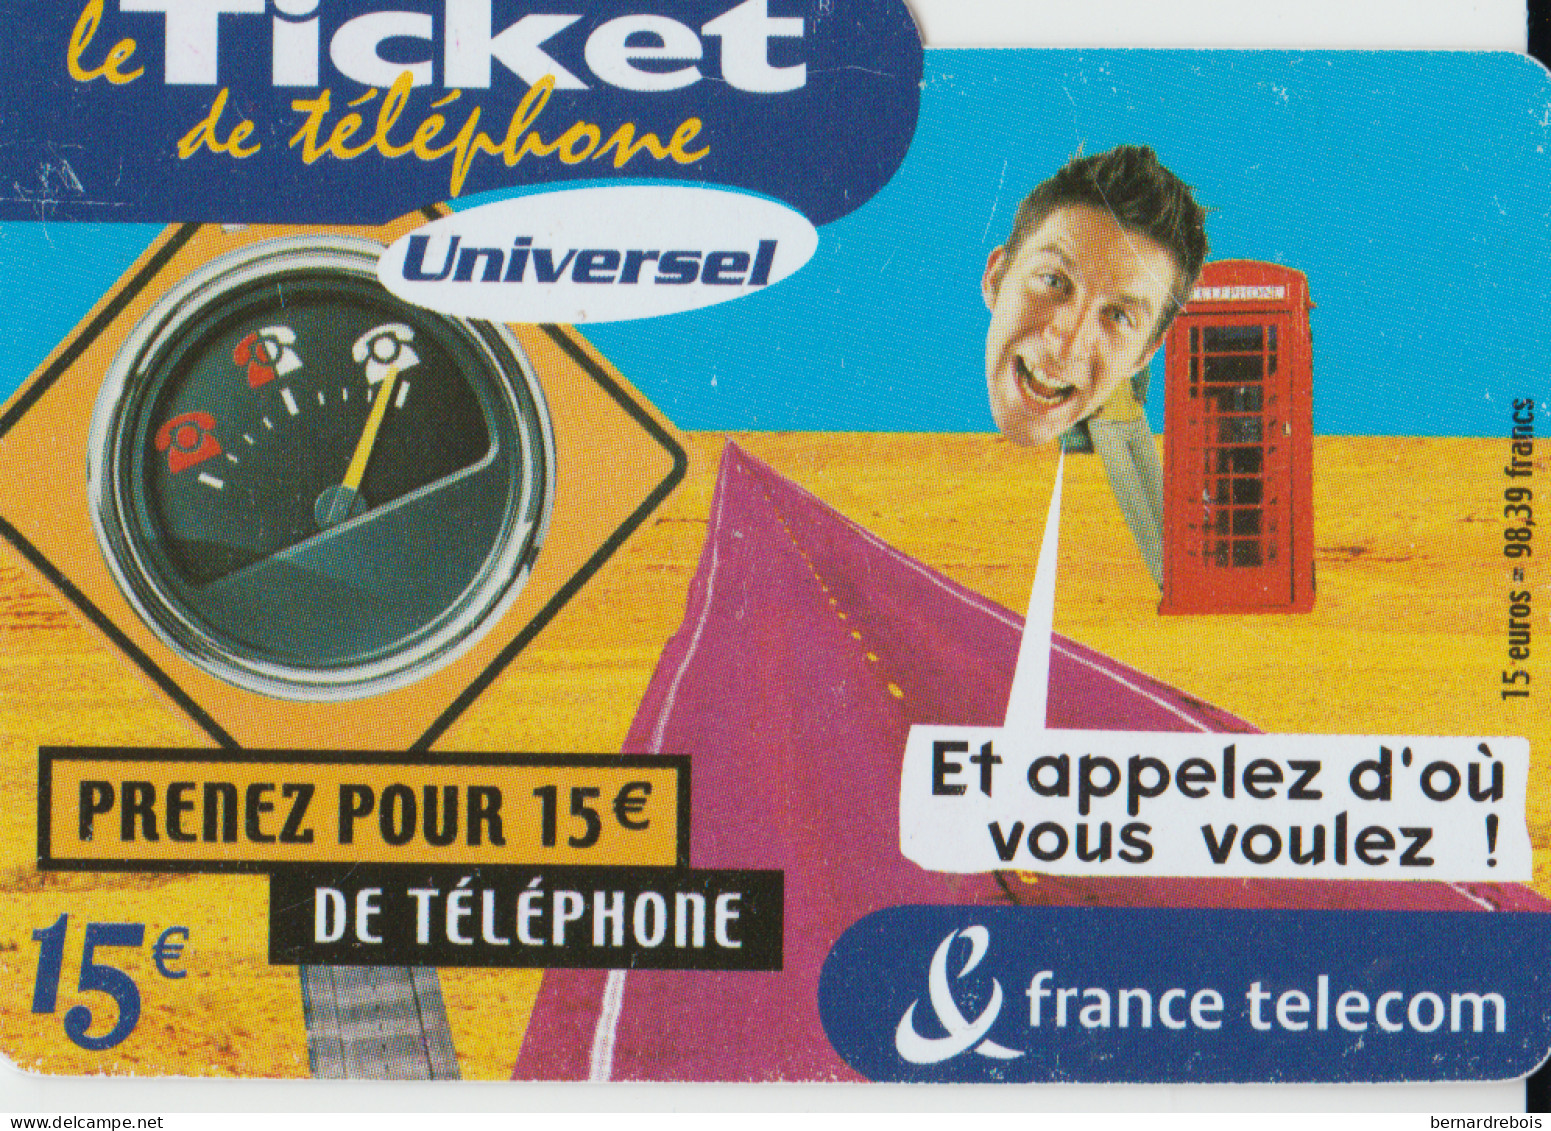 TC24 - TICKET TELEPHONE UNIVERSEL, Pour 1 € - Cellphone Cards (refills)